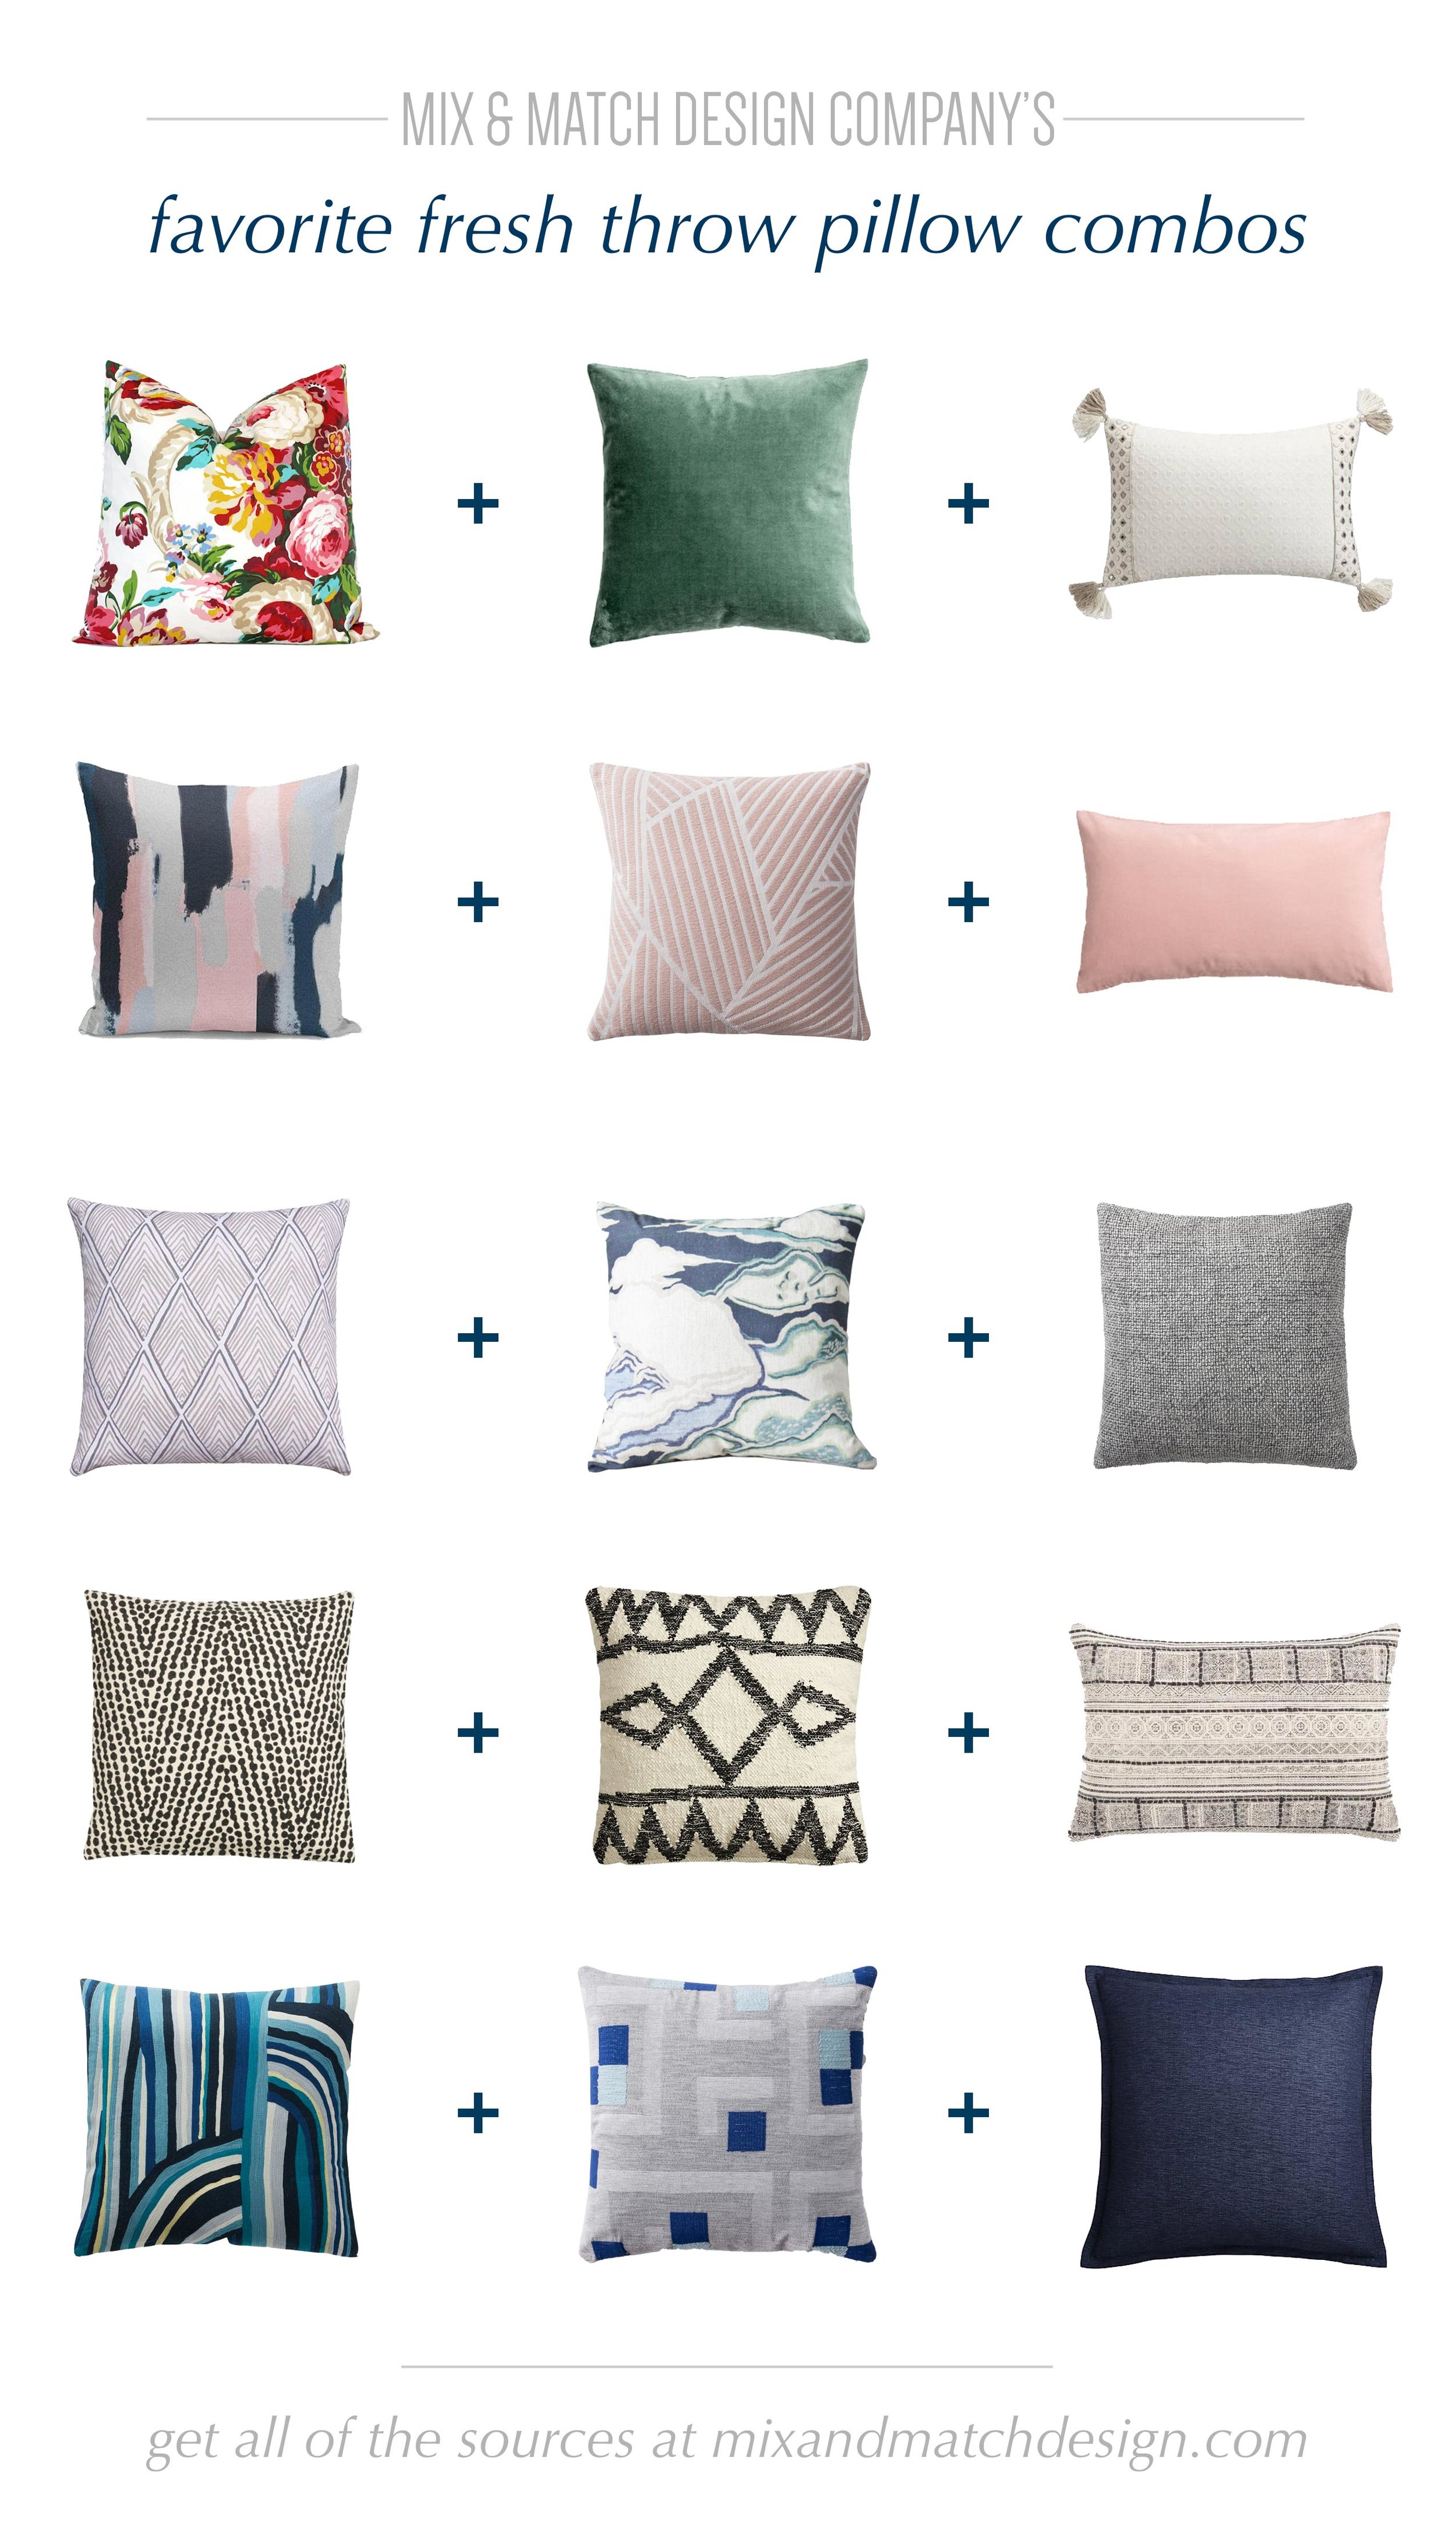 How to Mix and Match Throw Pillows